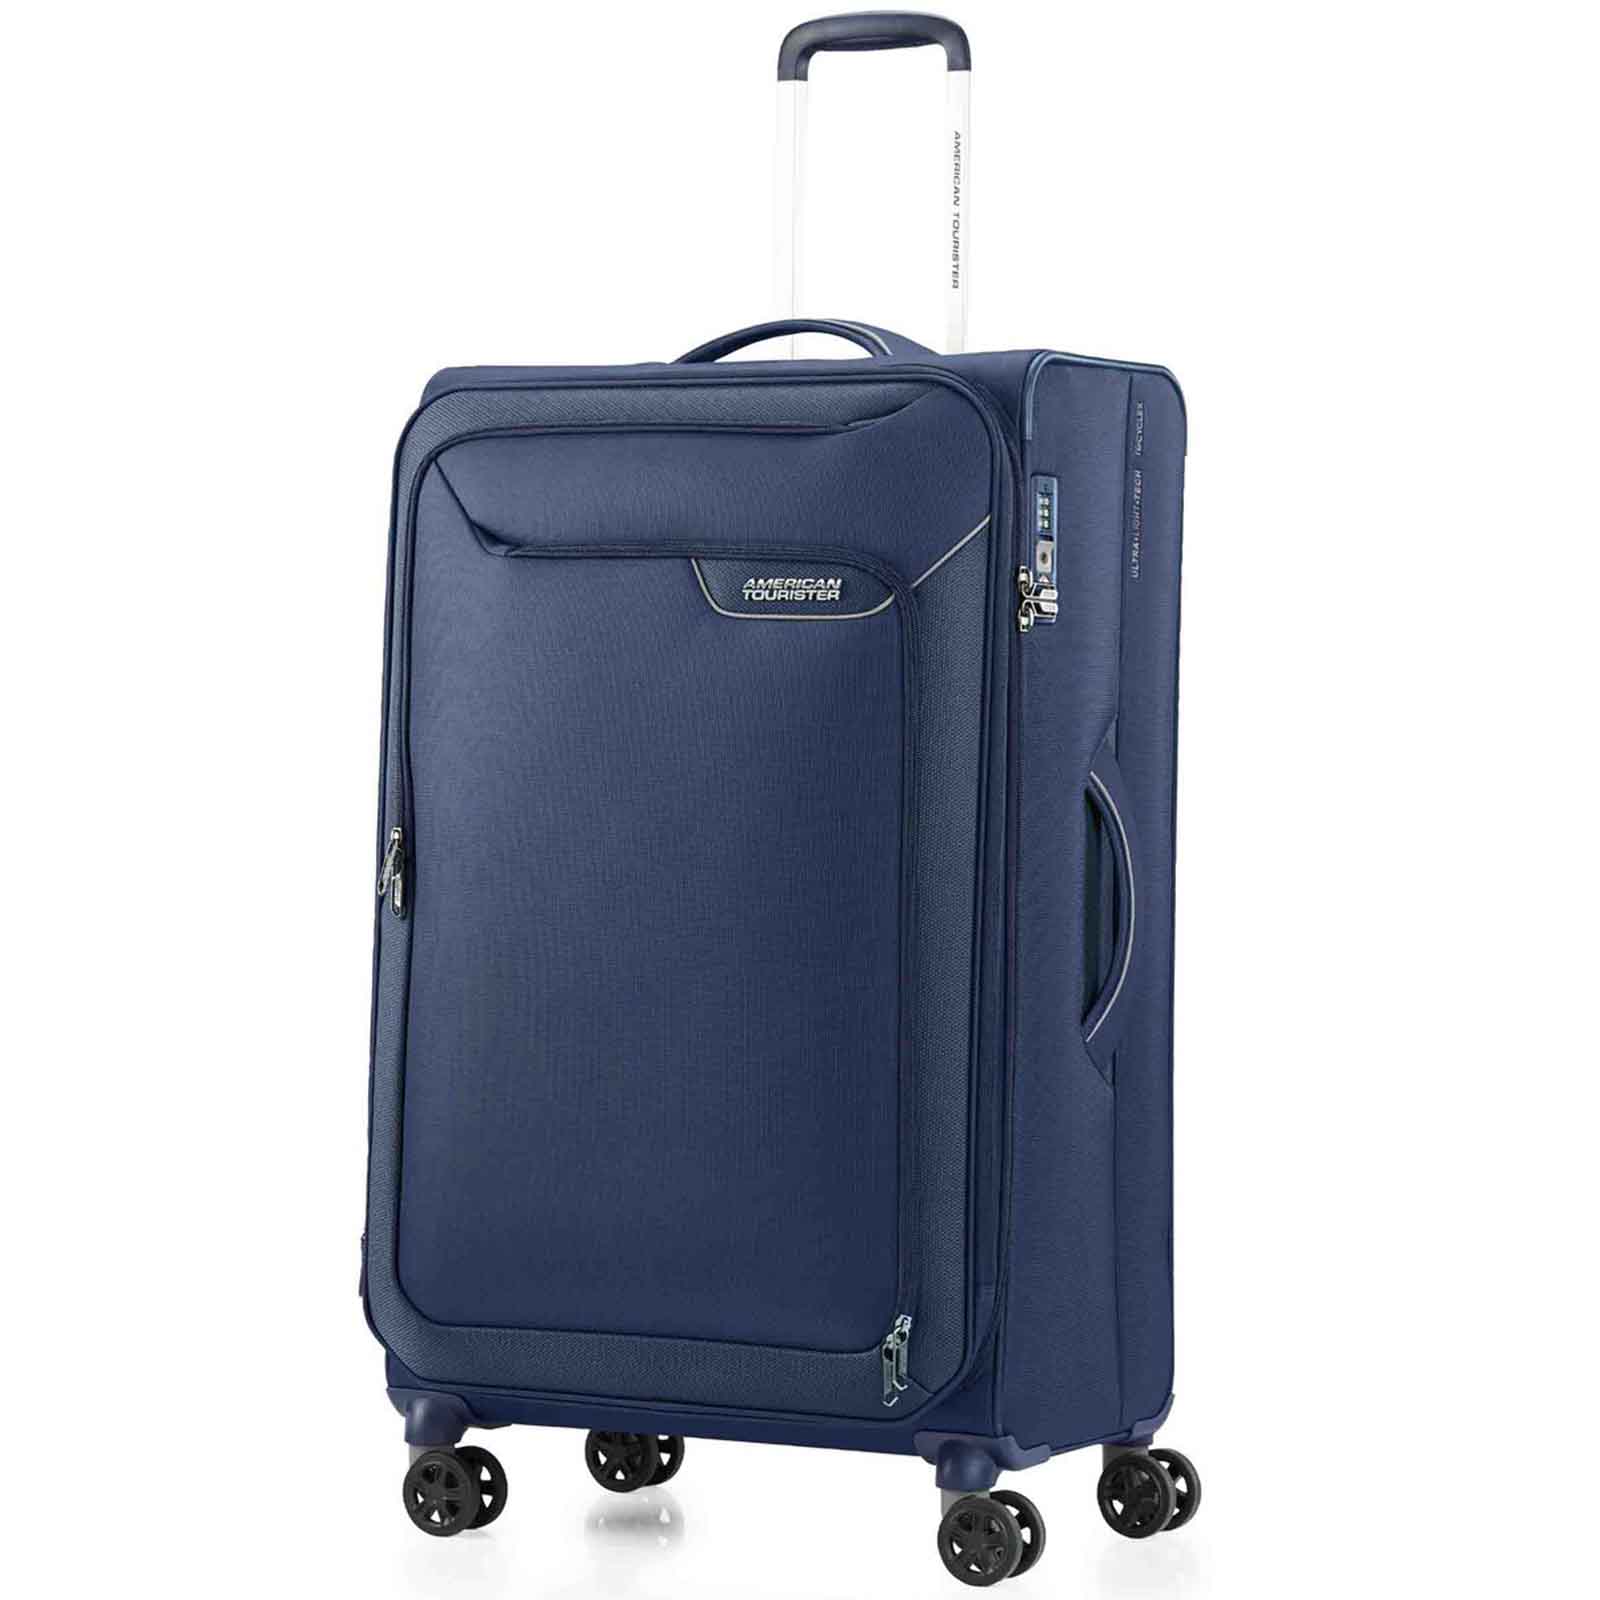 American-Tourister-Applite-4-Eco-82cm-Suitcase-Navy-Front-Angle